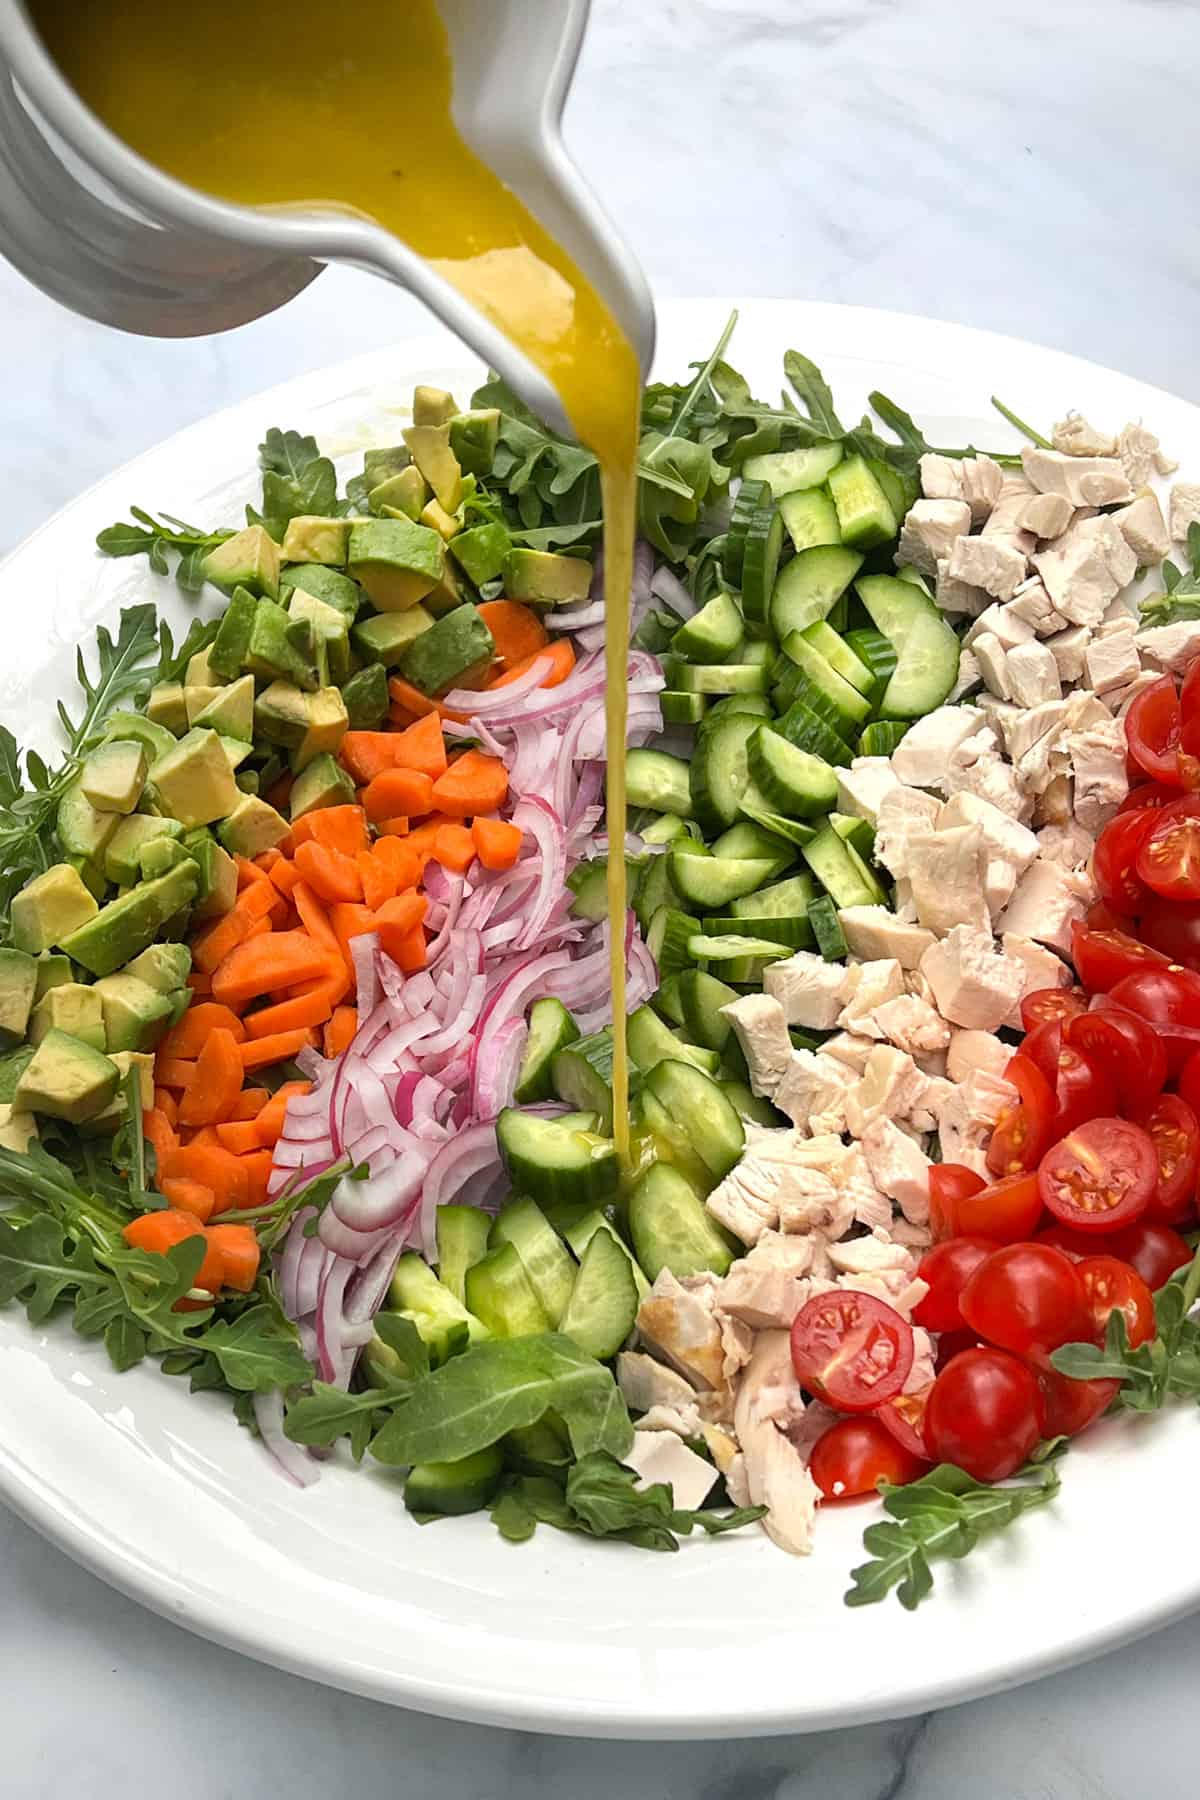 A rainbow of diced ingredients lined up in a large serving bowl, avocados, carrots, red onions, cucumbers, chicken, and cherry tomatoes. A stream of lemon dijon vinaigrette is being poured on top.